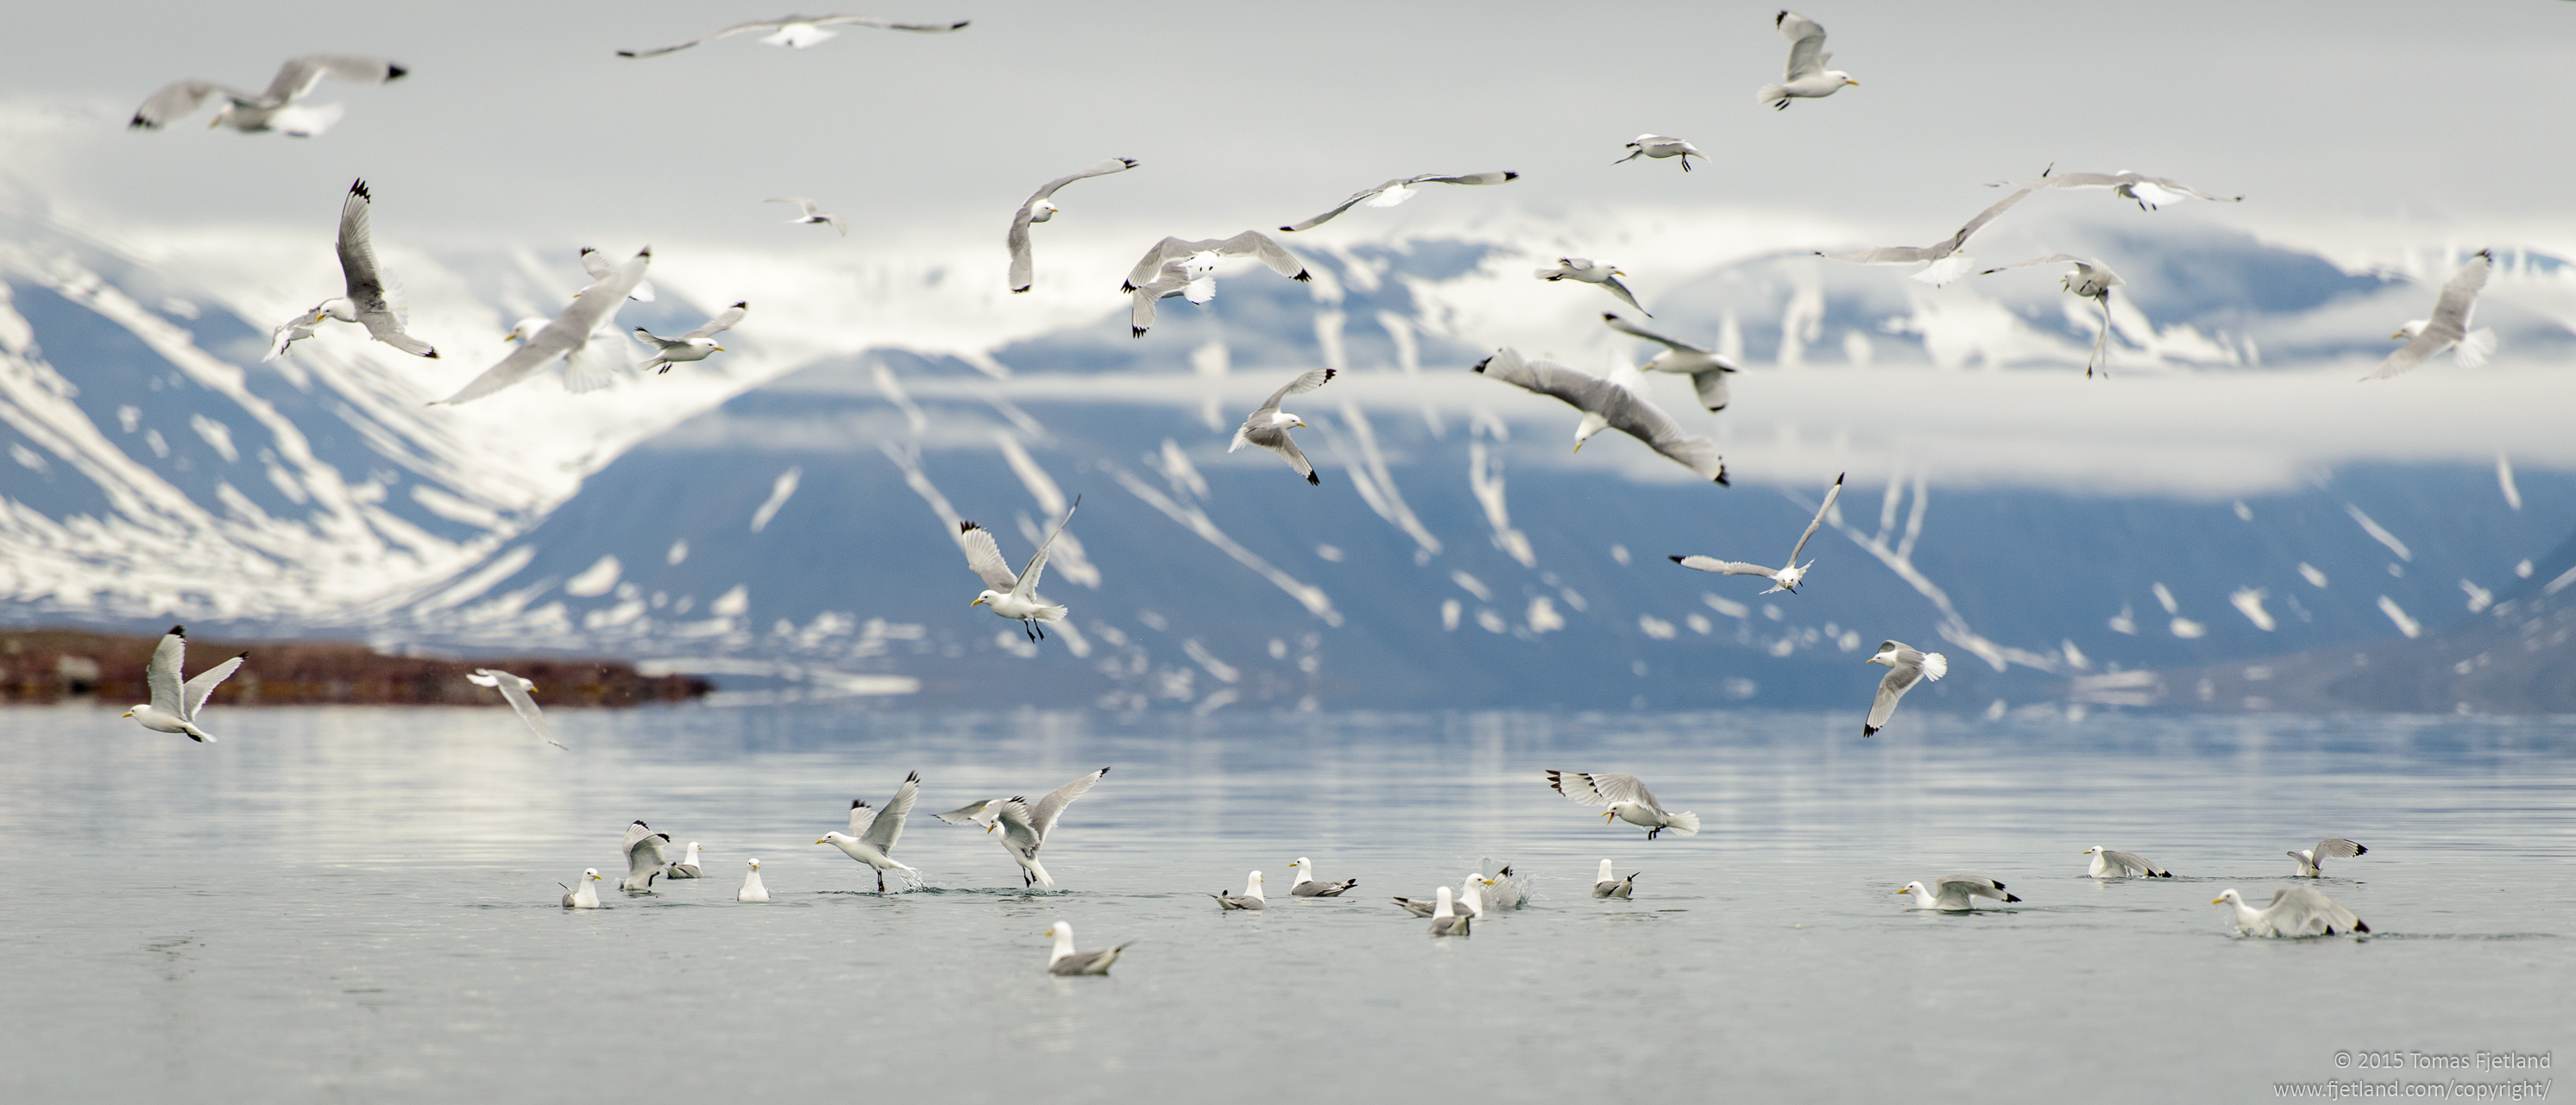 Kittiwakes swarming over a school of fish or zooplankton